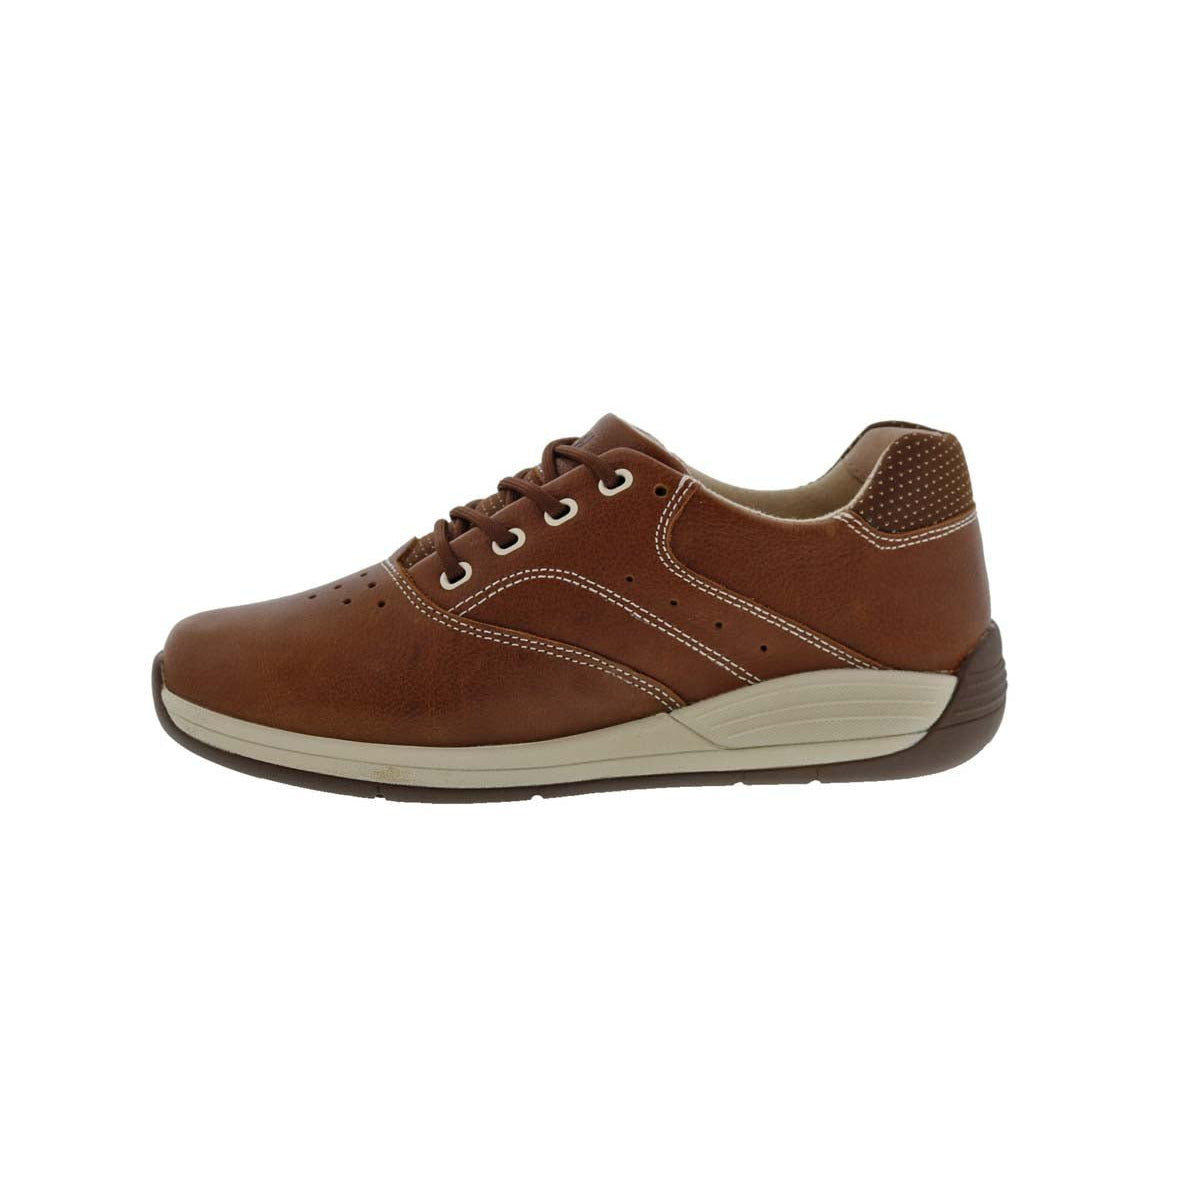 DREW TOUR WOMEN OXFORD WALKING SHOES IN CAMEL LEATHER - TLW Shoes